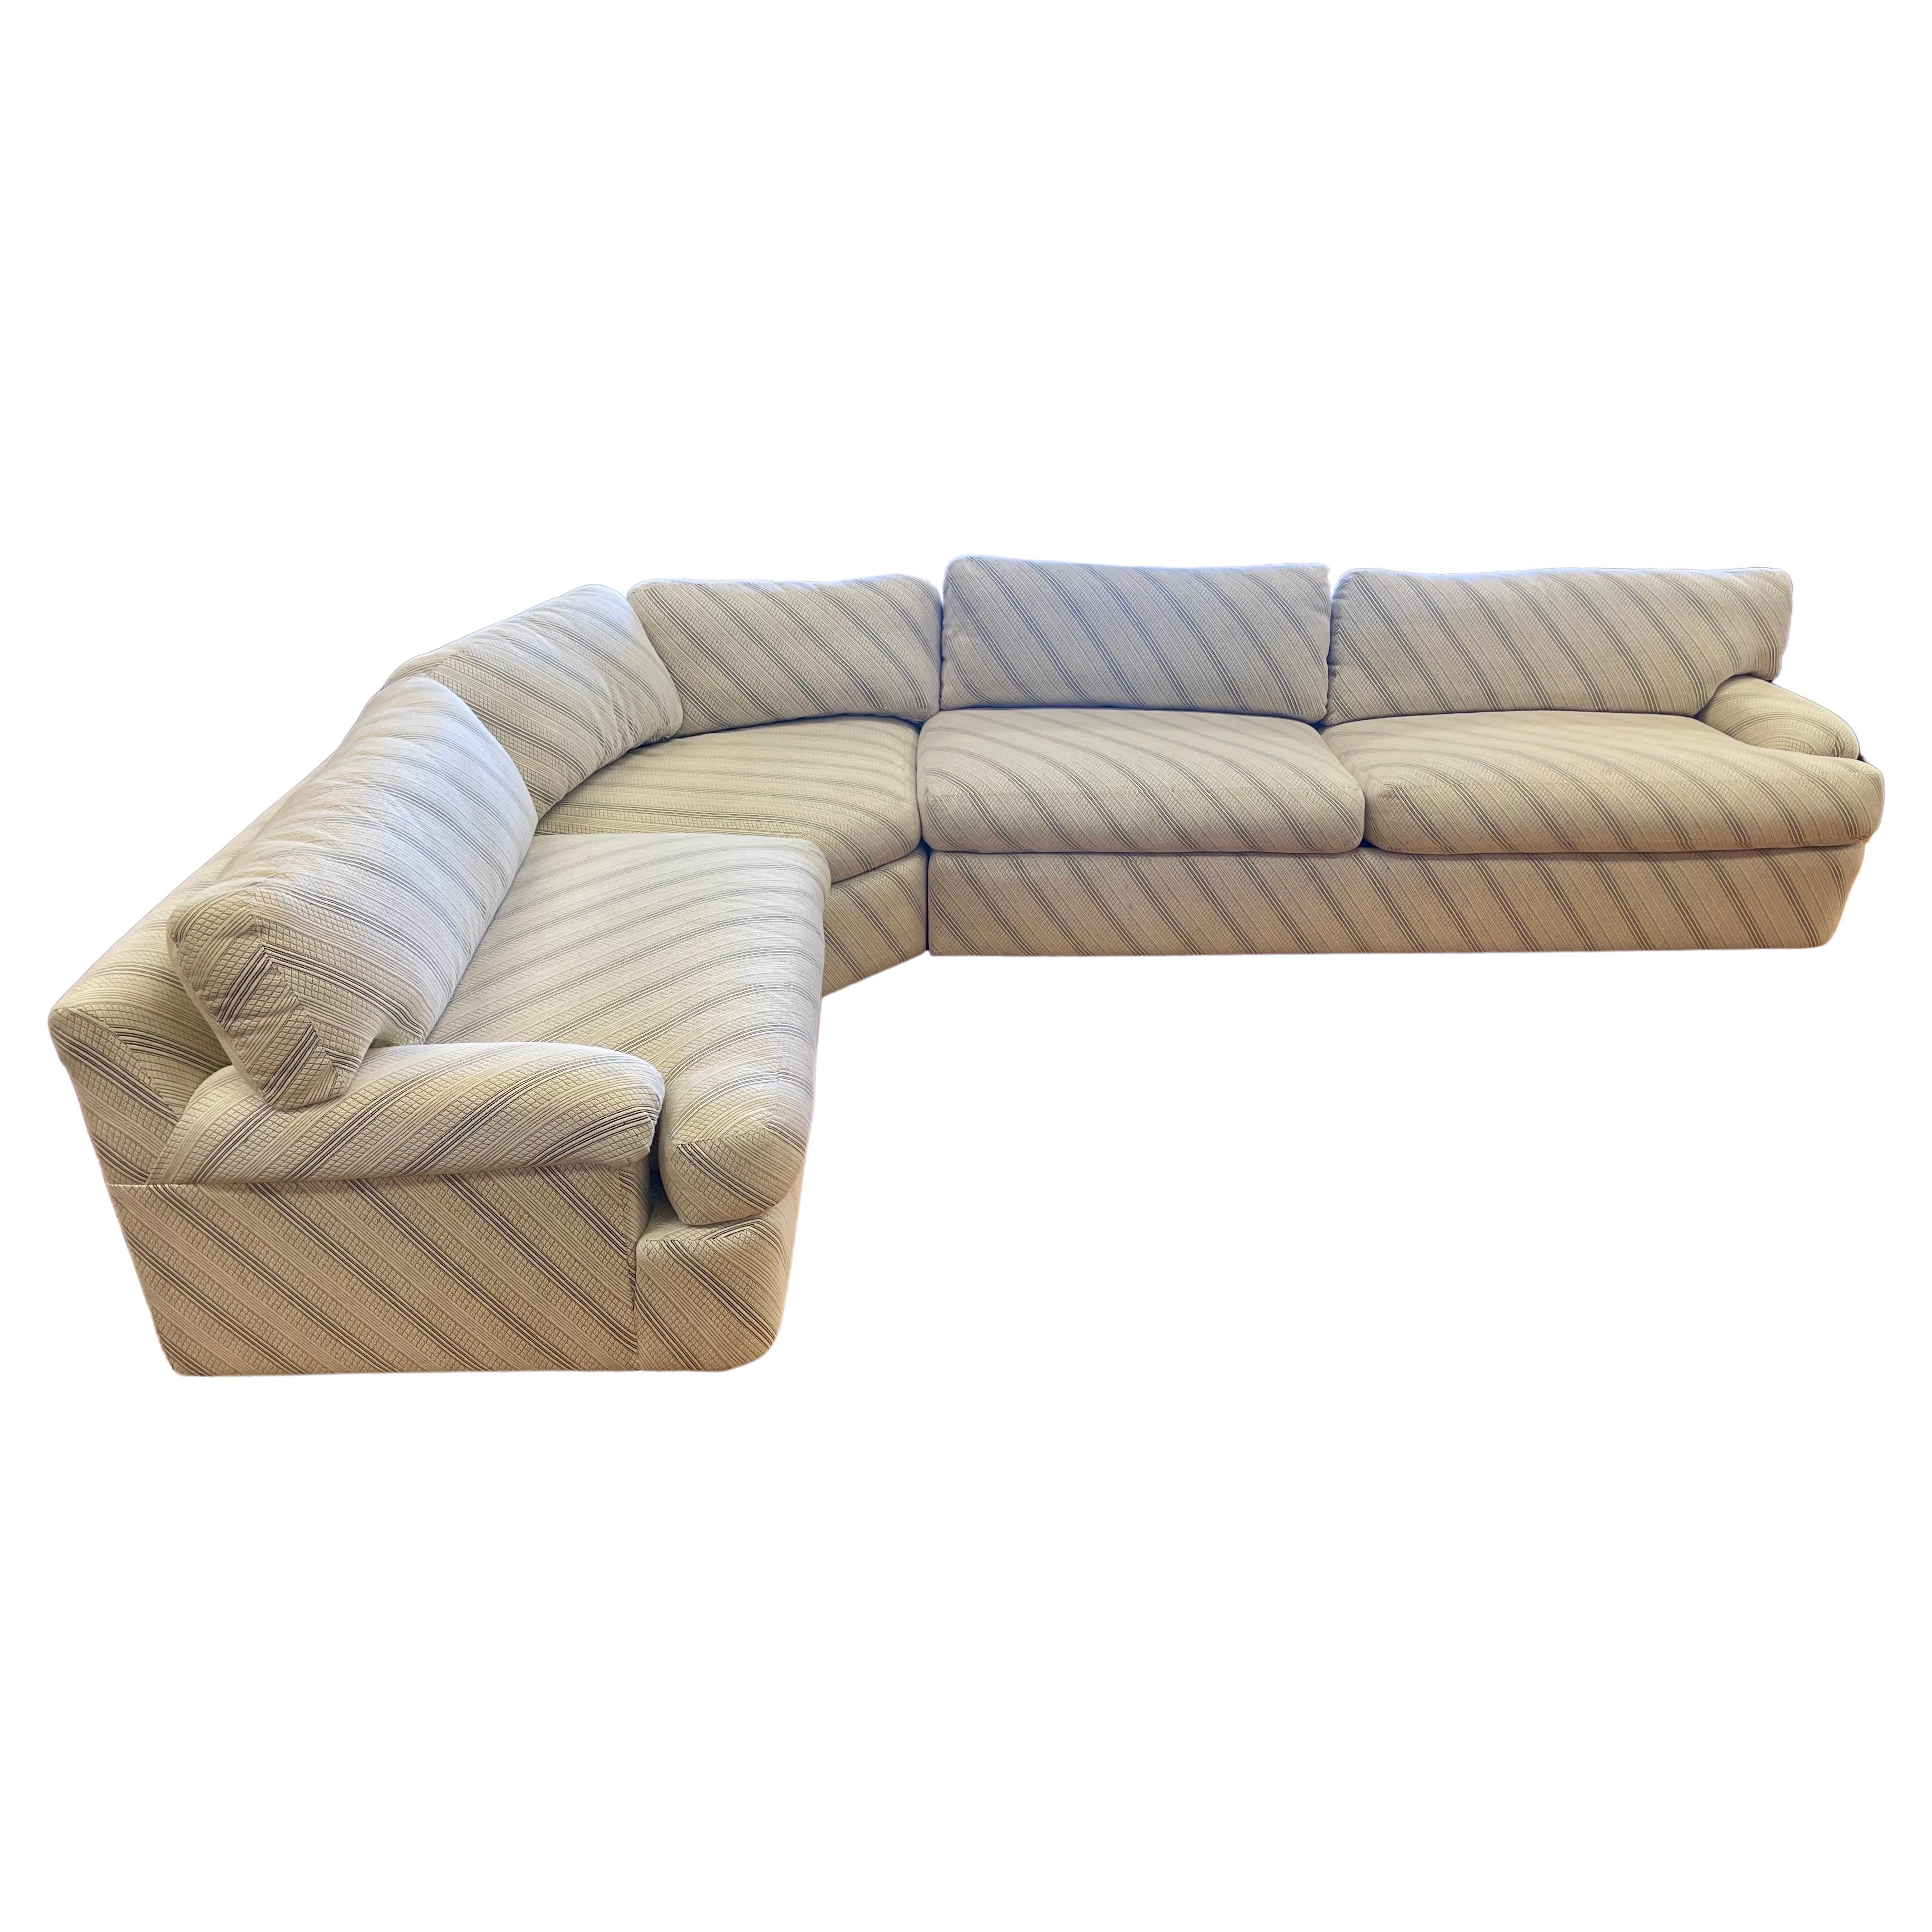 Signed Directional Furniture Mid Century Modern 3PC Curved Sectional Sofa For Sale